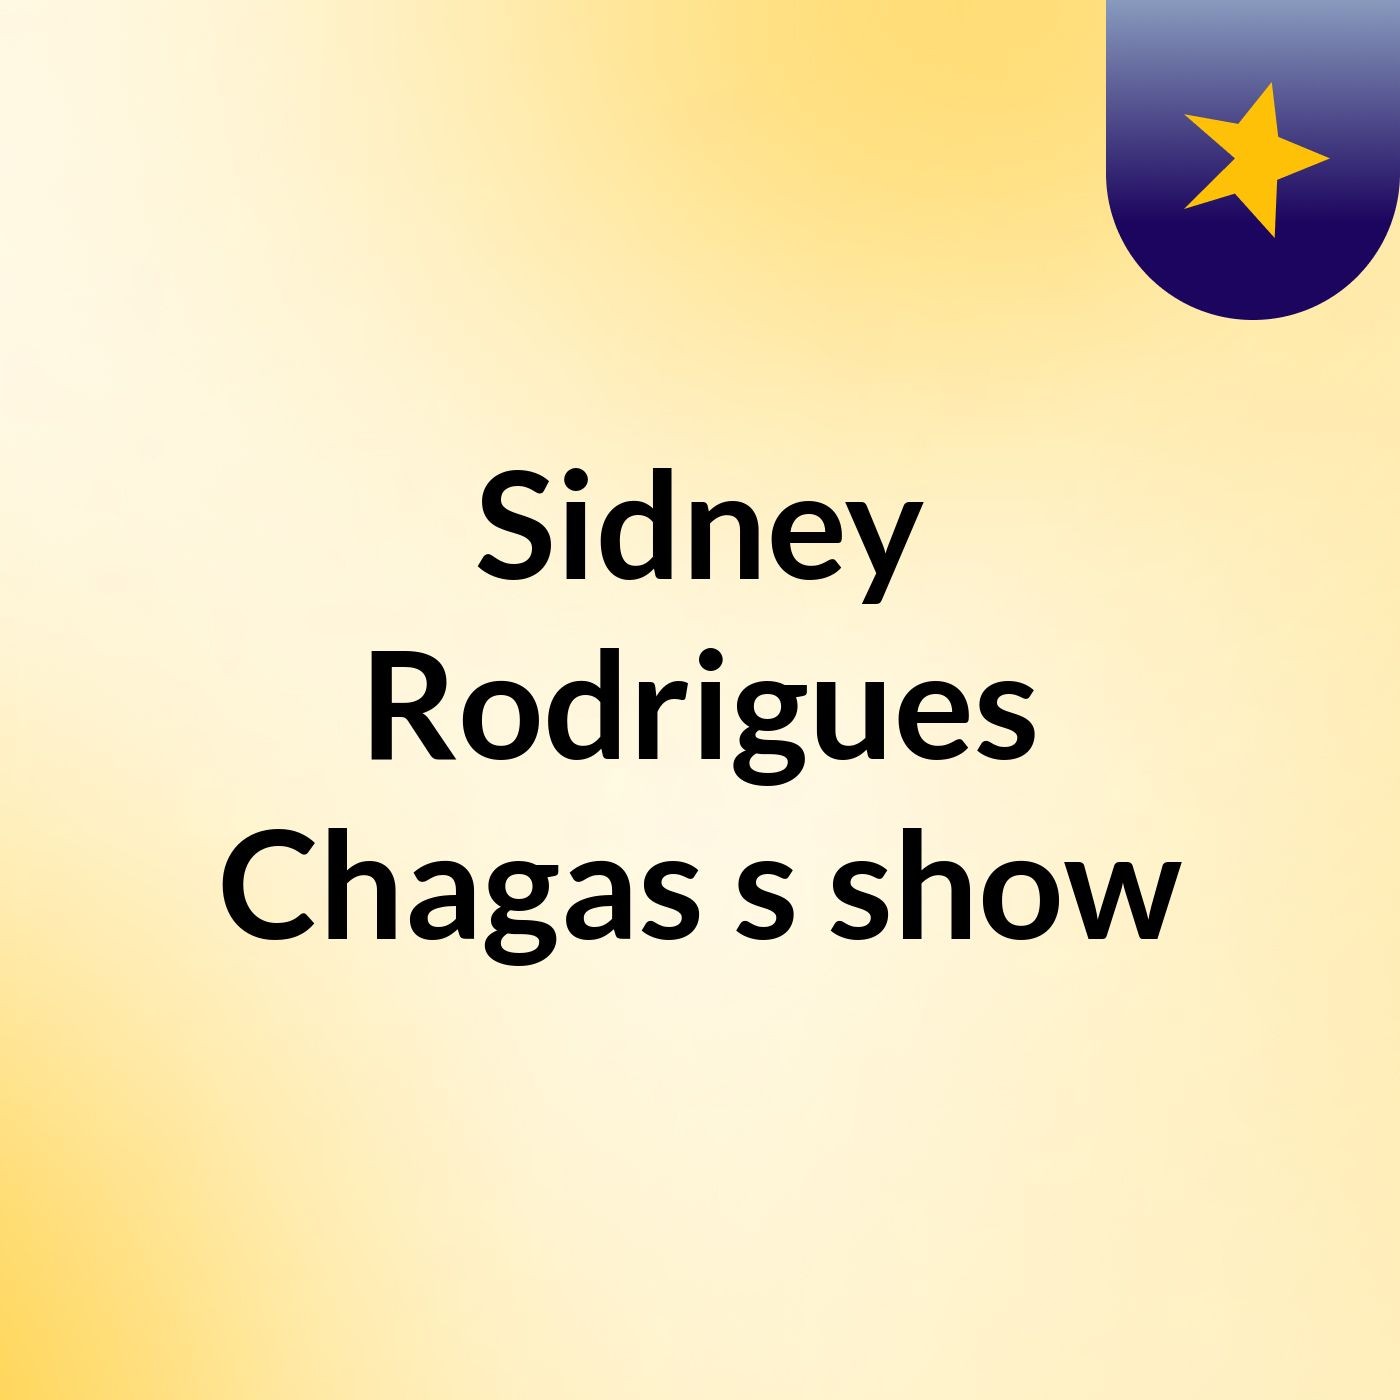 Sidney Rodrigues Chagas's show